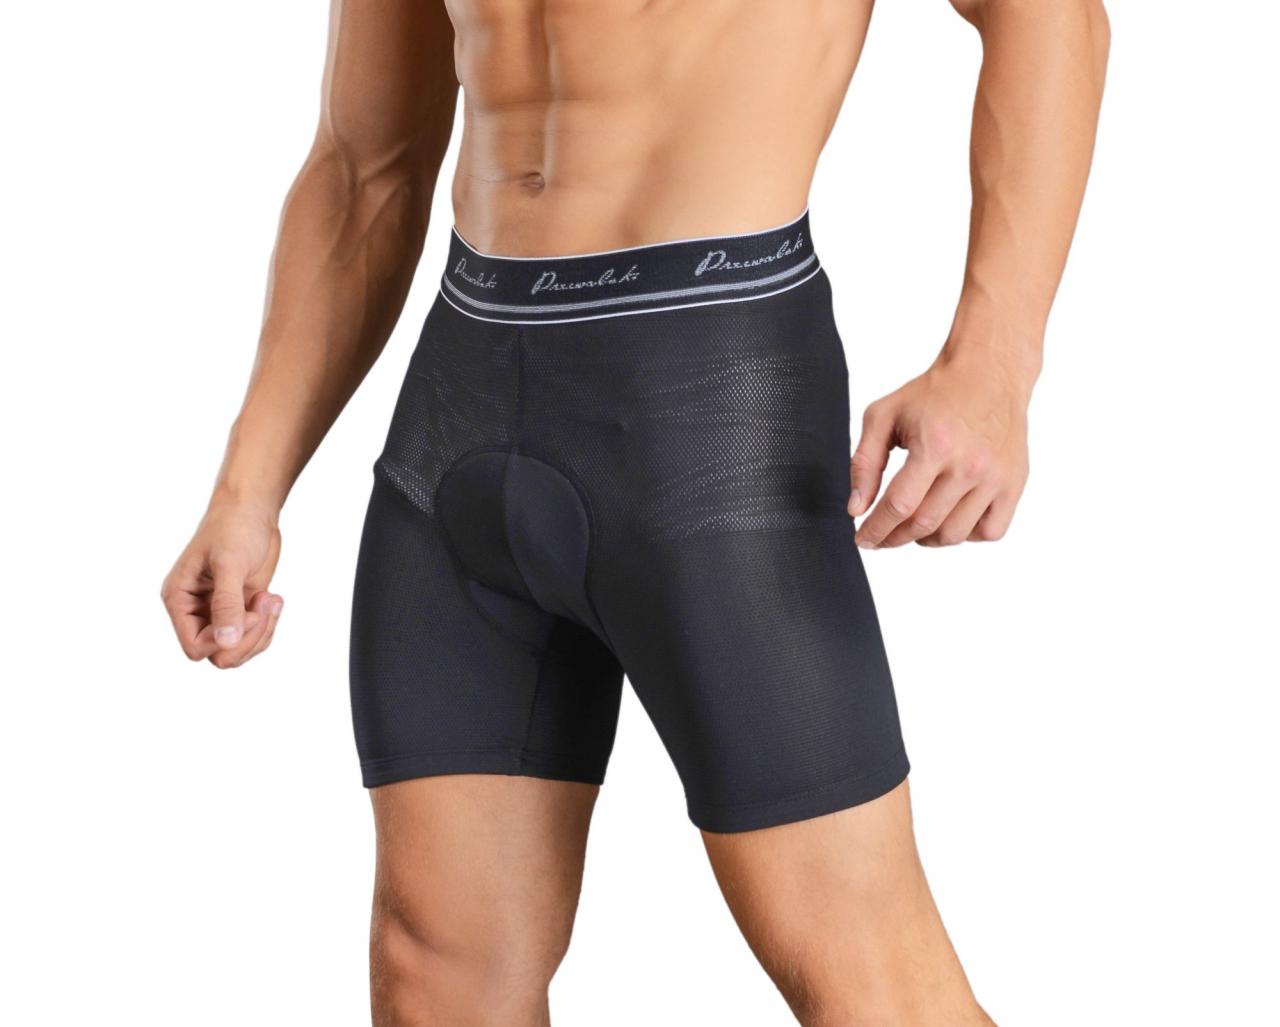 Buy Przewalski Mens 3D Padded Cycling Bike Bib Shorts, Excellent  Performance and Better Fit Online in Vietnam. B07DN57HY5